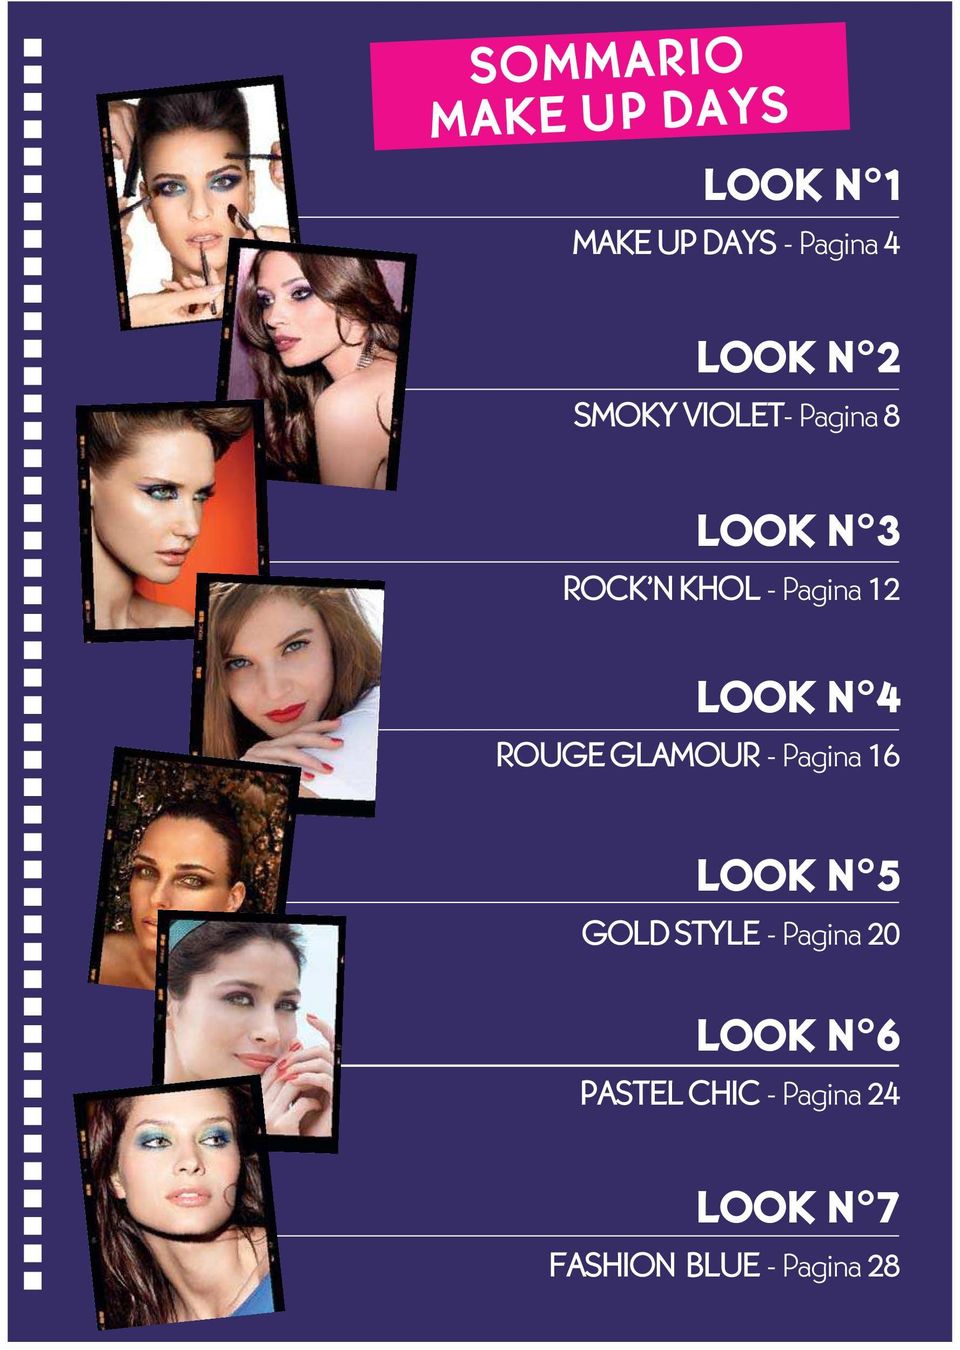 4 ROUGE GLAMOUR - Pagina 16 LOOK N 5 GOLD STYLE - Pagina 20